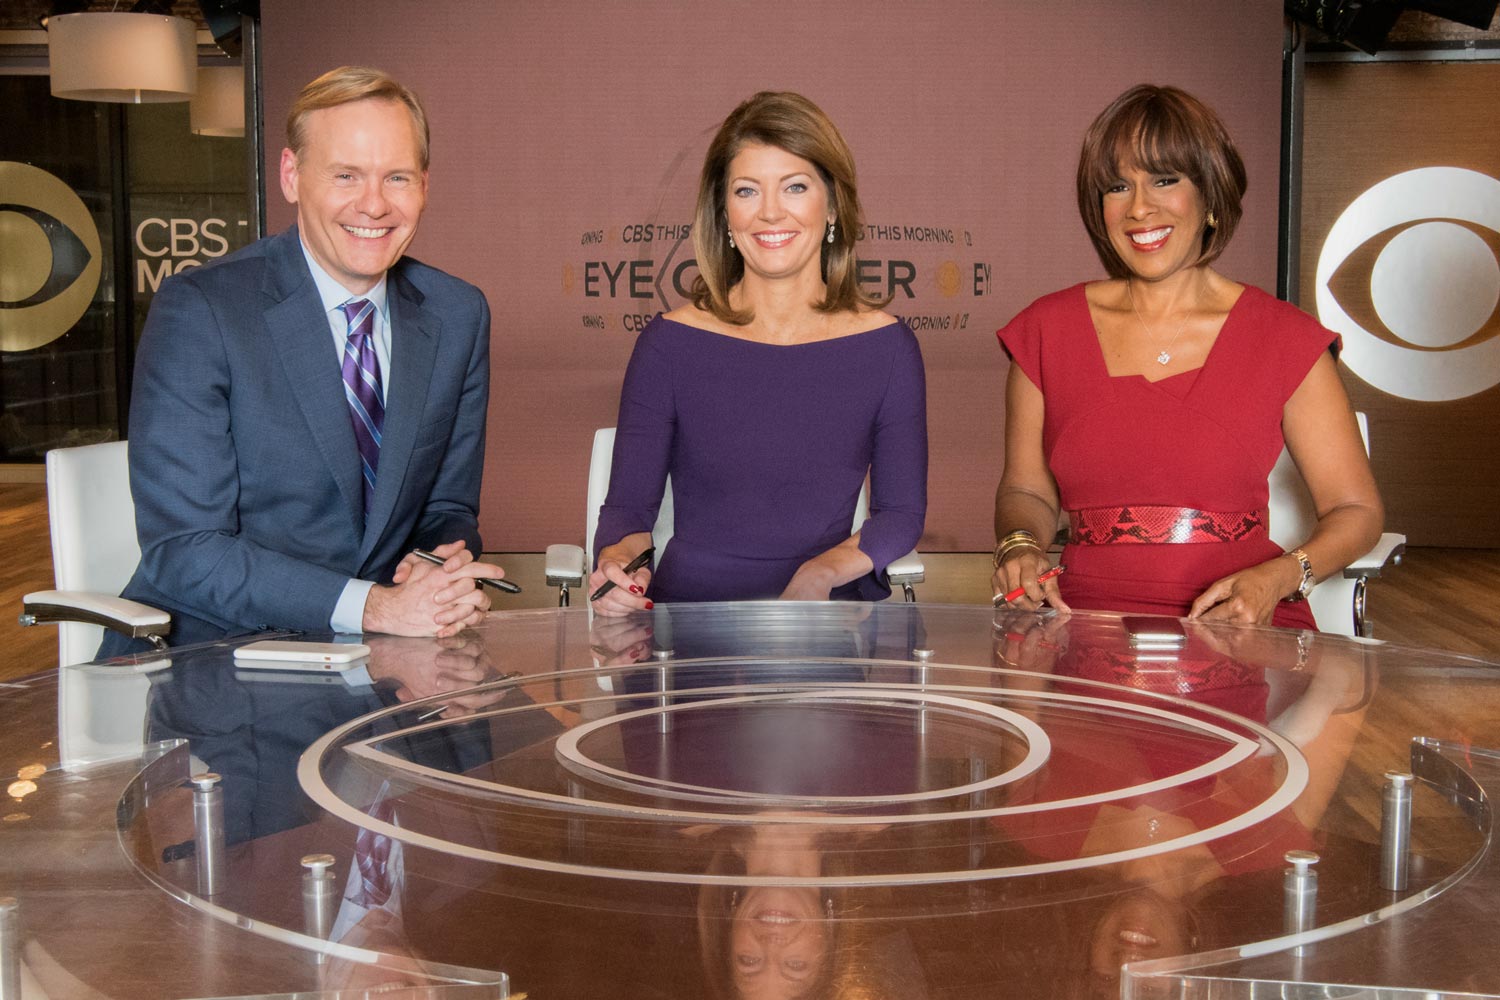  Norah O’Donnell, Gayle King and John Dickerson sit at a table smiling